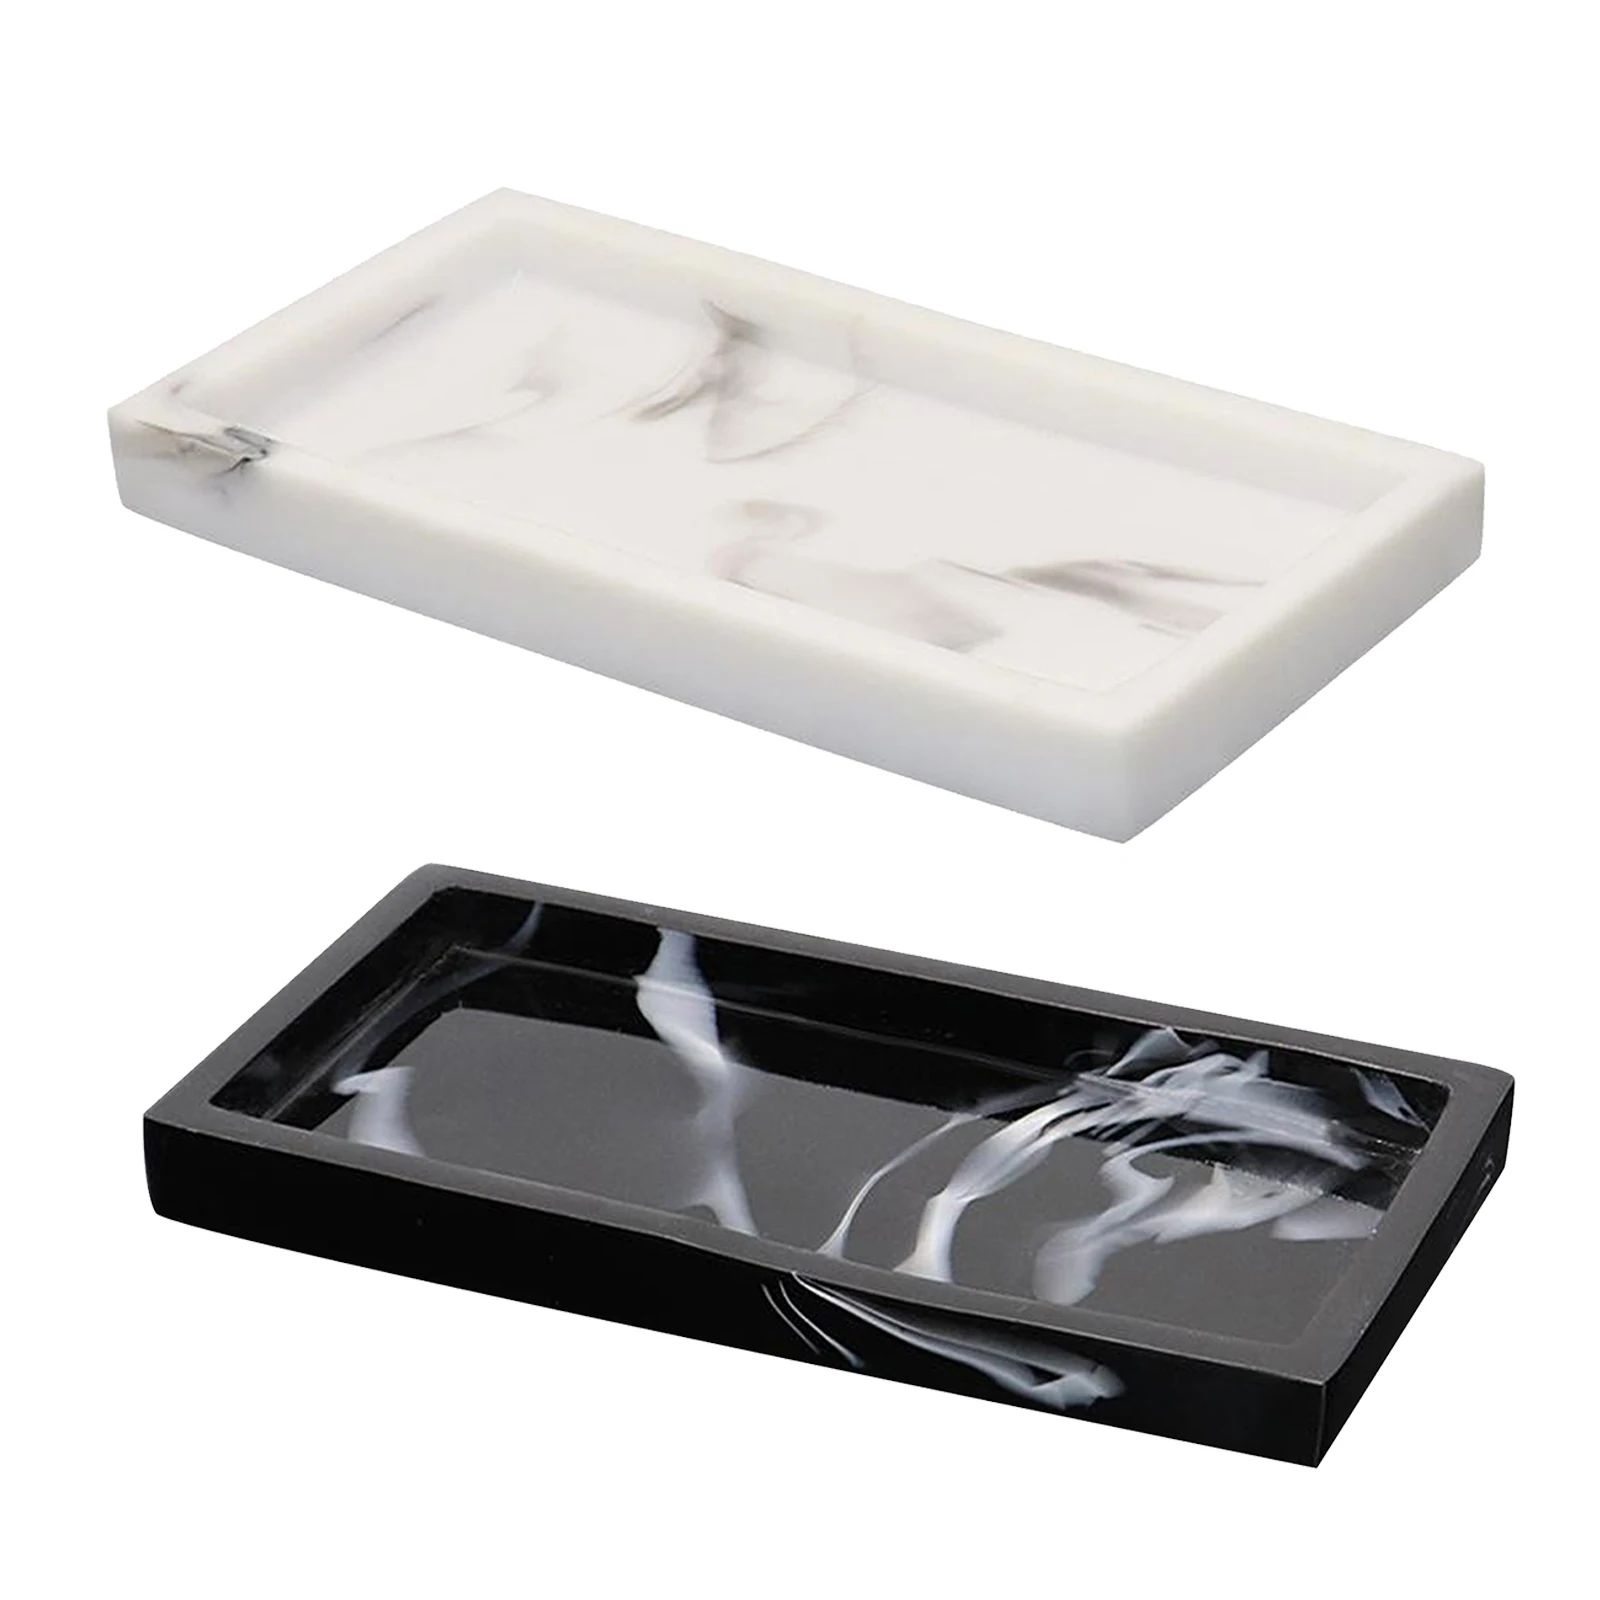 Luxury Marble Print Resin Bathtub Serving Tray Dish for Tissues Soap Perfume